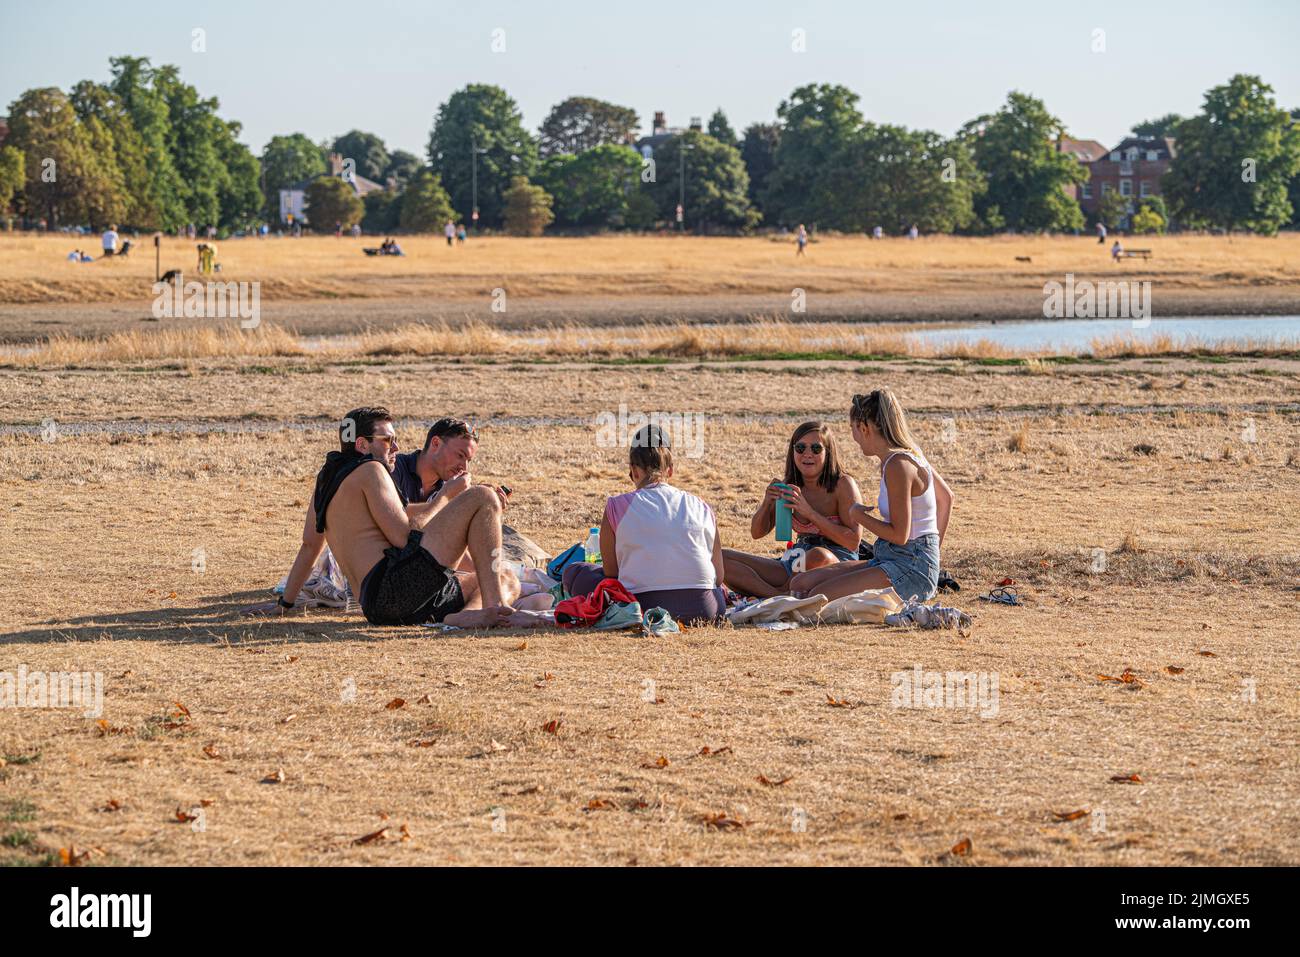 Wimbledon, London, UK. 6 August 2022  A group of people relaxing in the afternoon sunshine on the parched  grass of Wimbledon Common  as the hot weather and a lack of rainfall continue to grip much of the south of England and the UK, with temperatures expected to reach  above 30celsius  by next week Credit. amer ghazzal/Alamy Live News Stock Photo